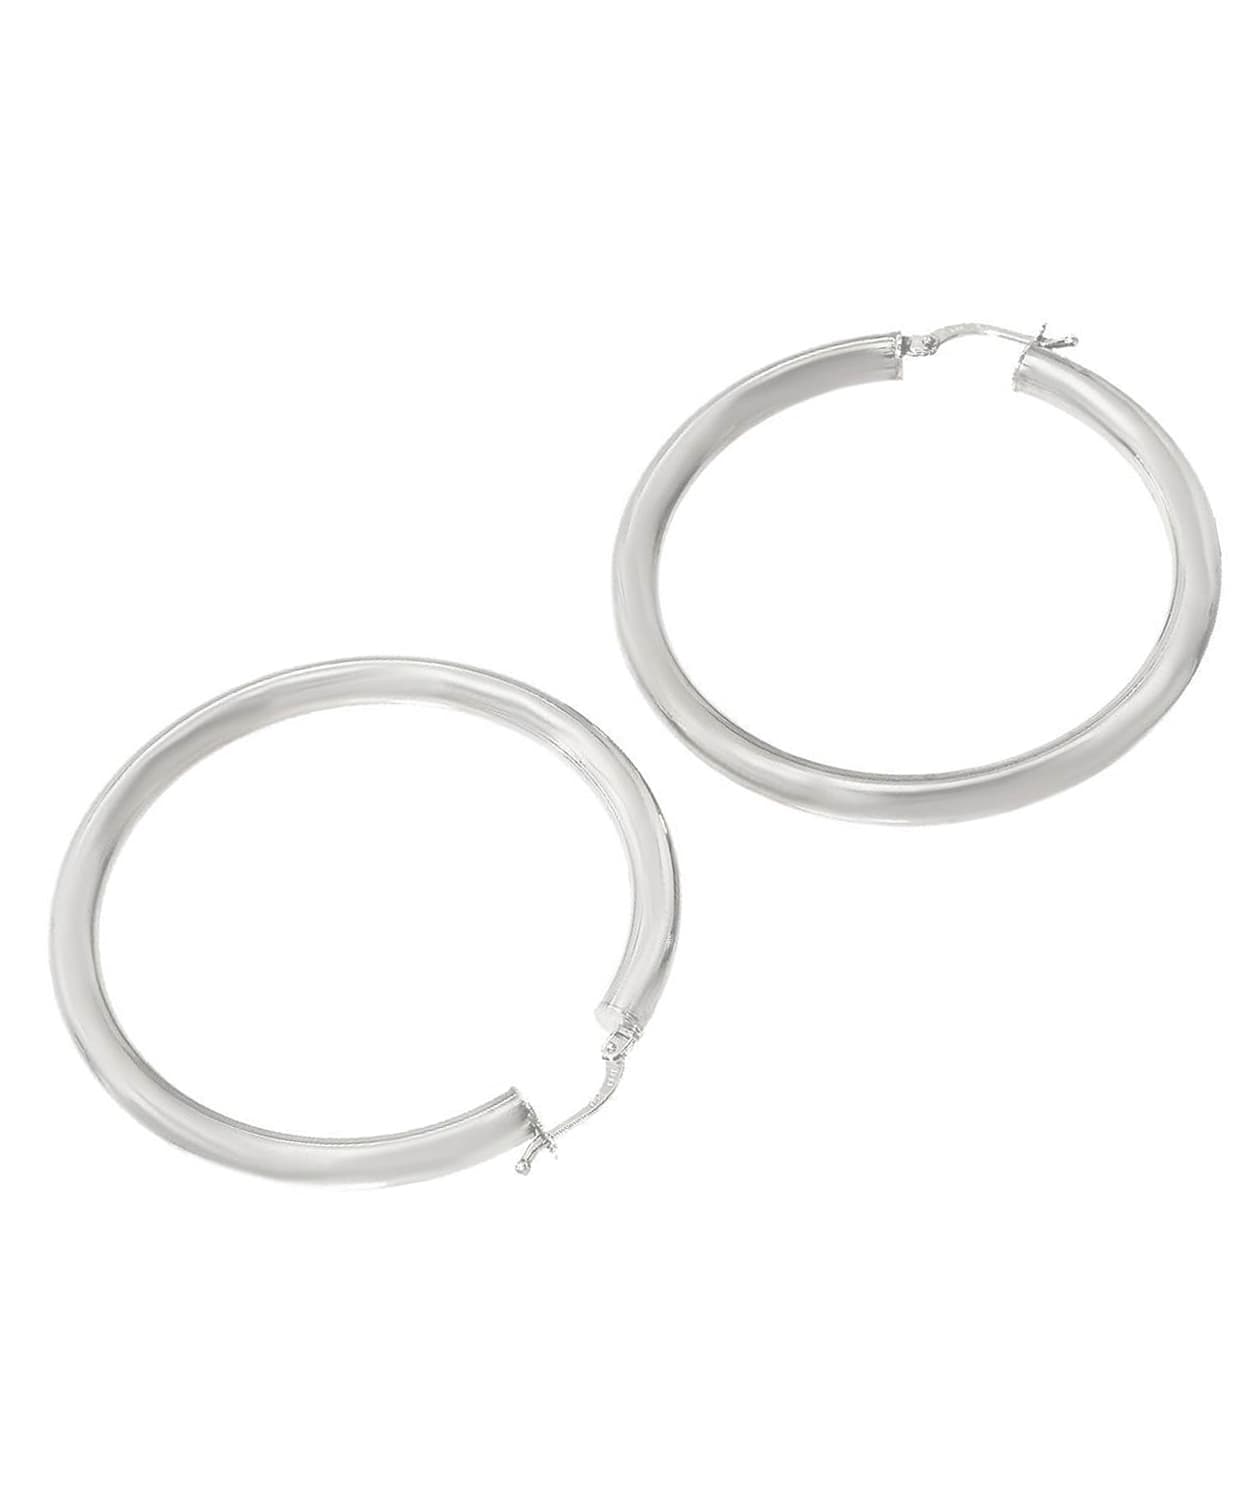 46mm Large 14k White Gold Classic Hoop Earrings View 2